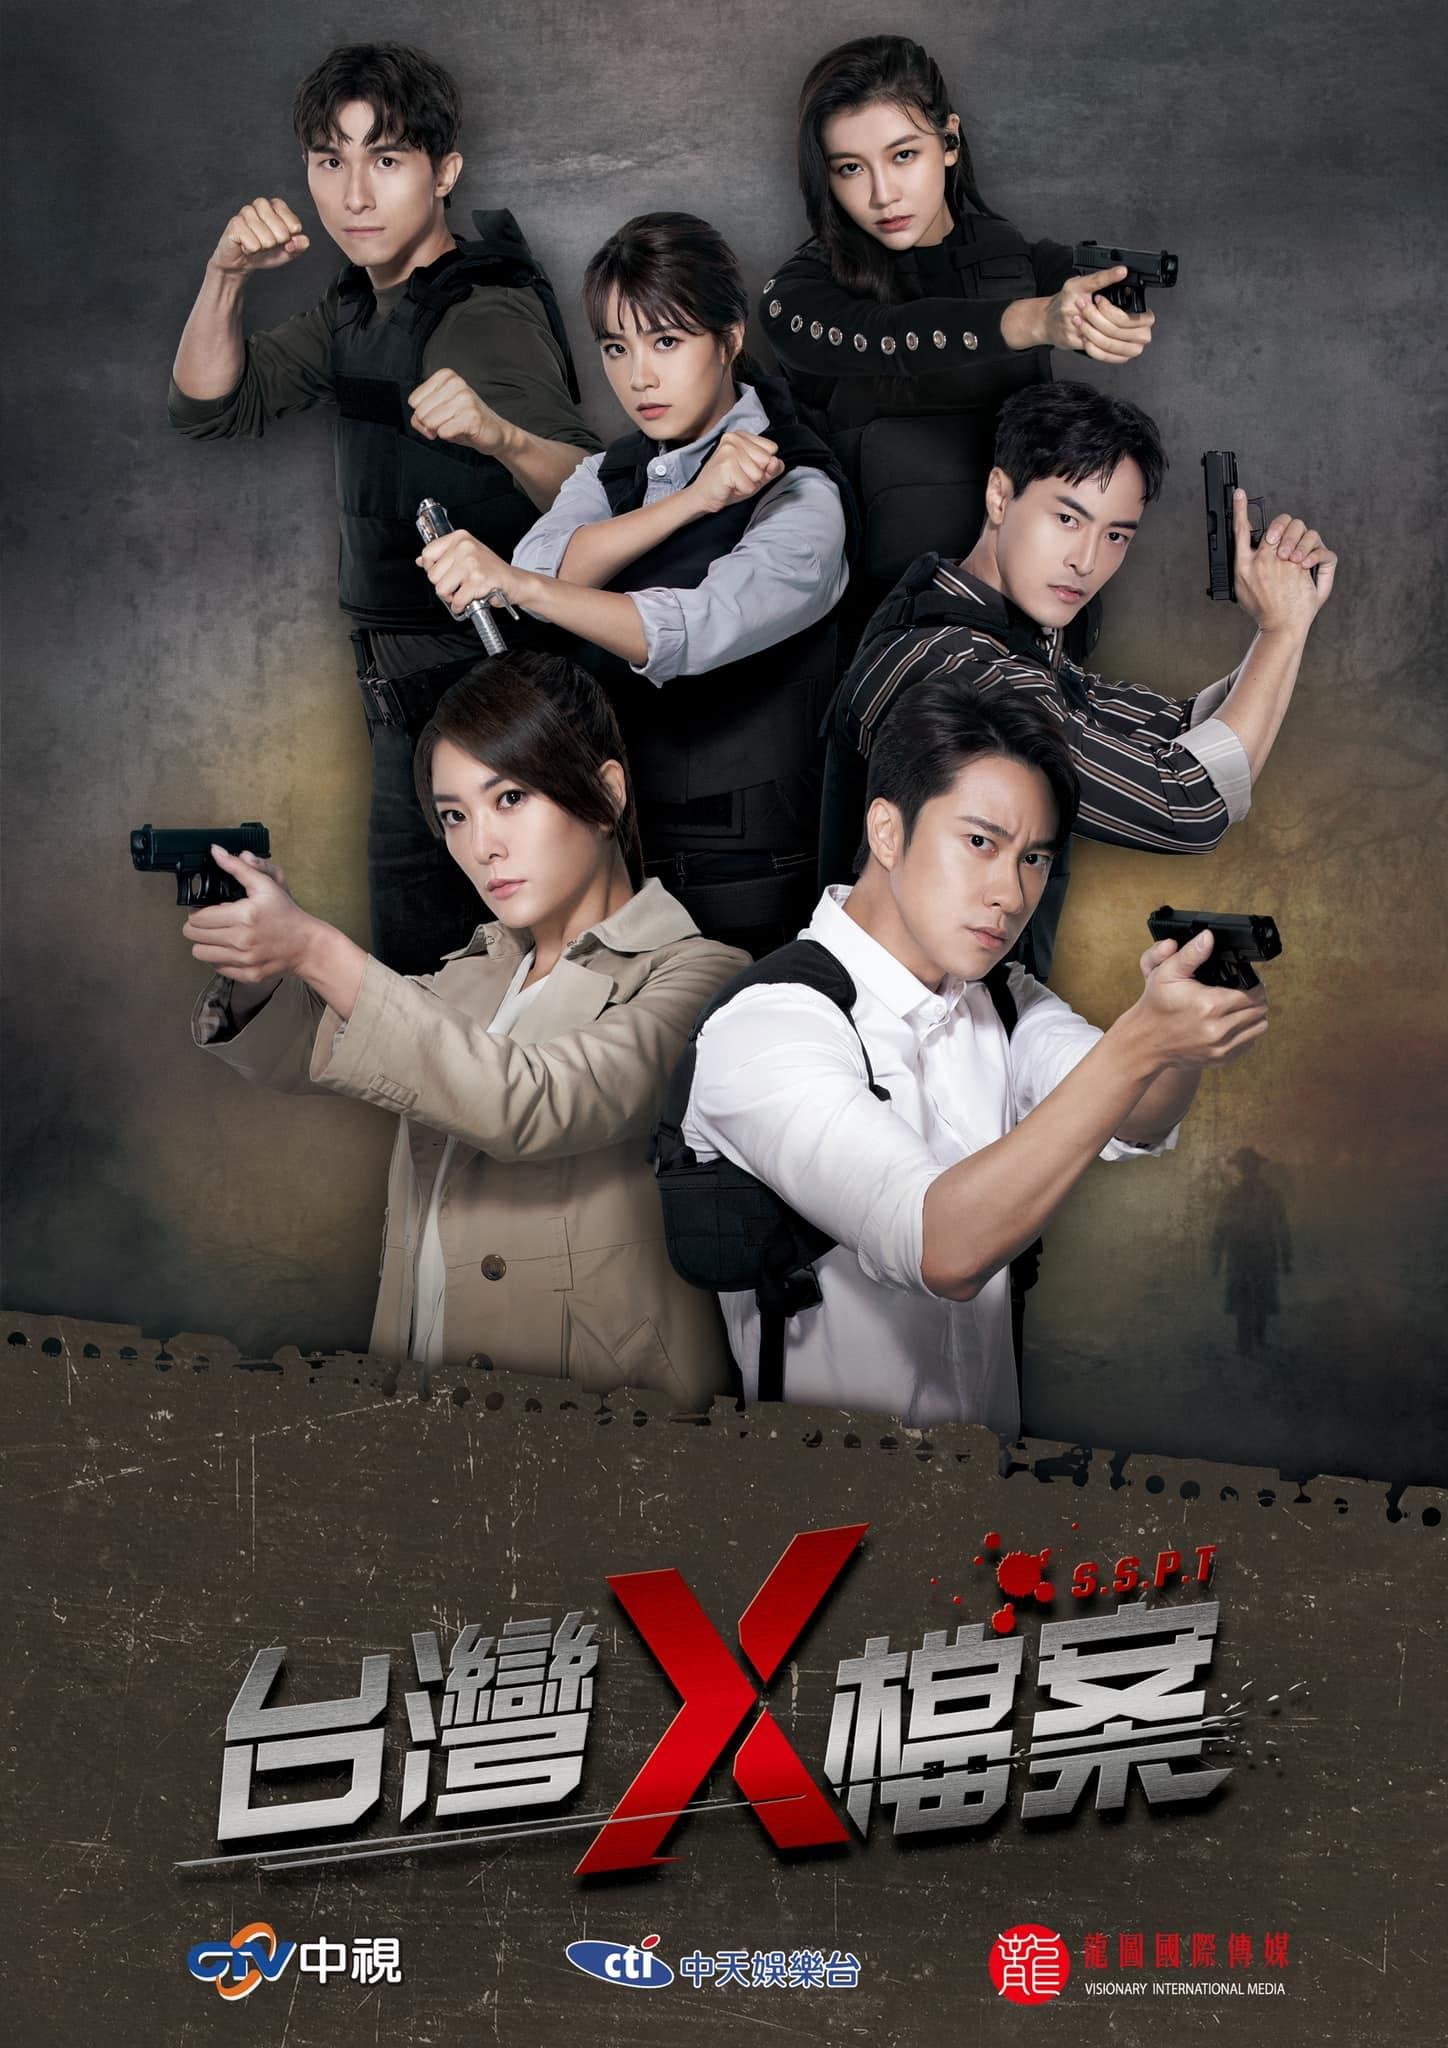 TV ratings for S.S.P.T. (台灣X檔案) in Mexico. CTV TV series